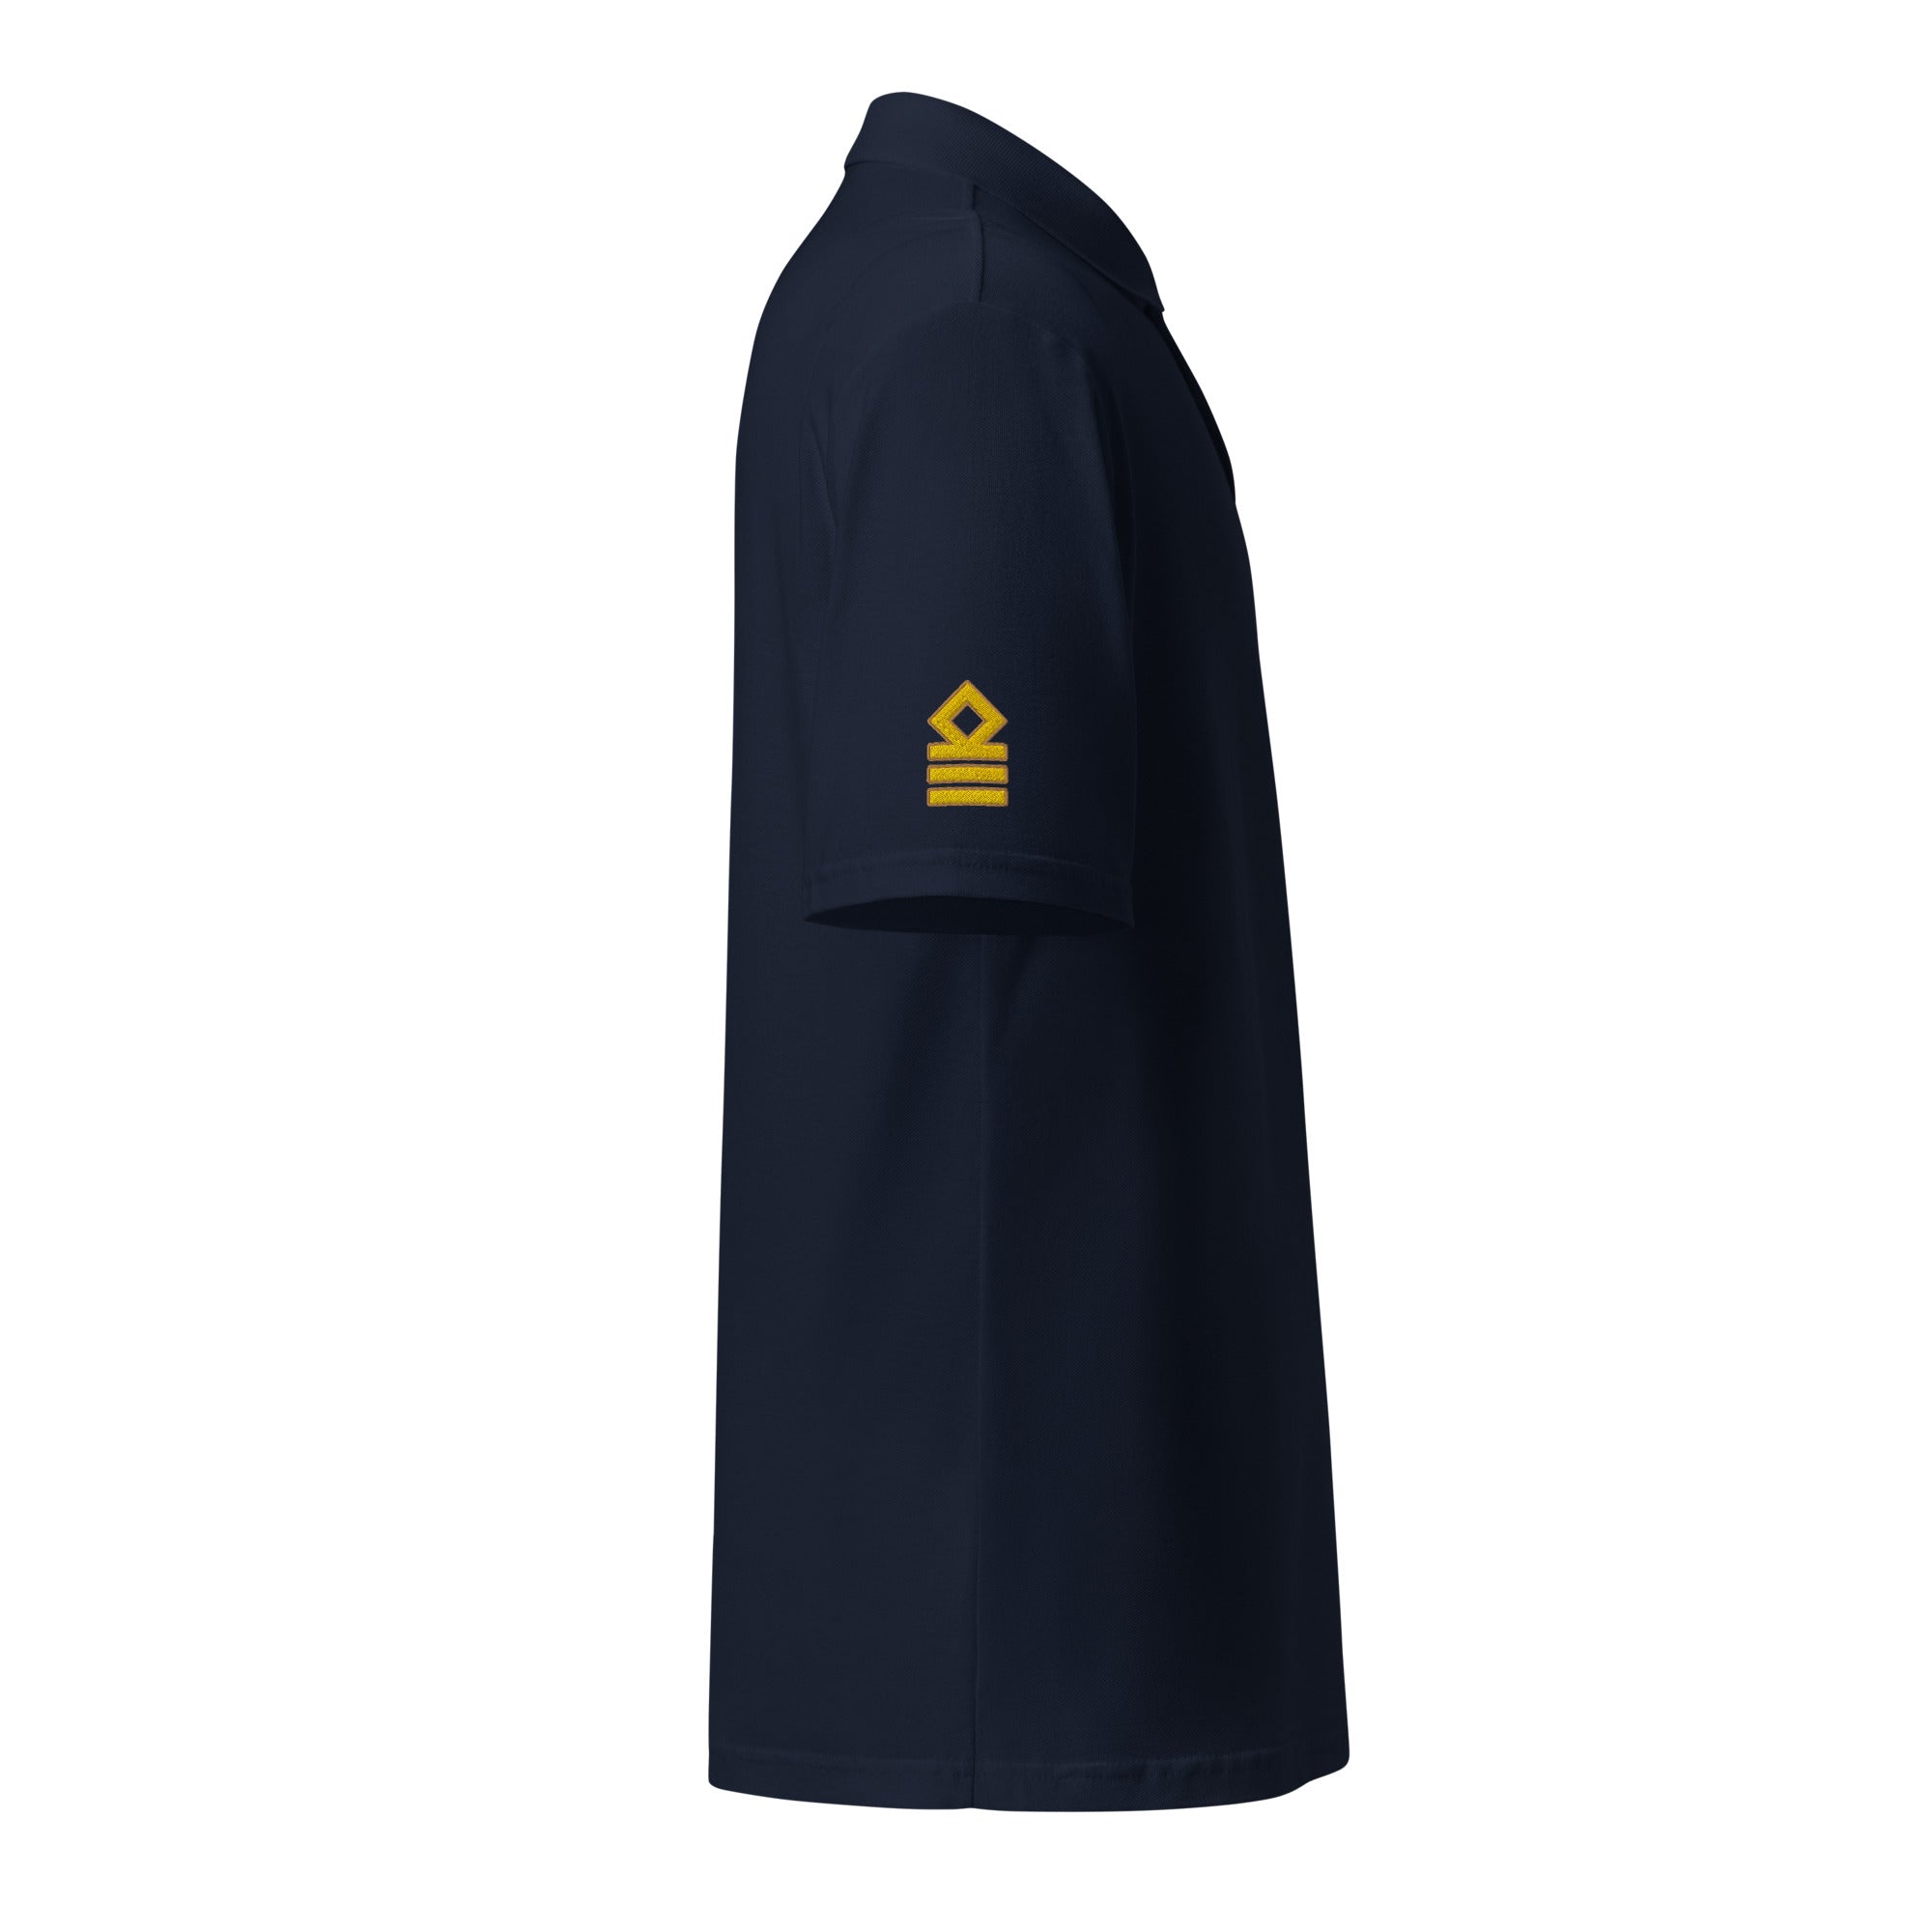 Chief Officer polo left chest and sleeves. (Choose epaulettes)